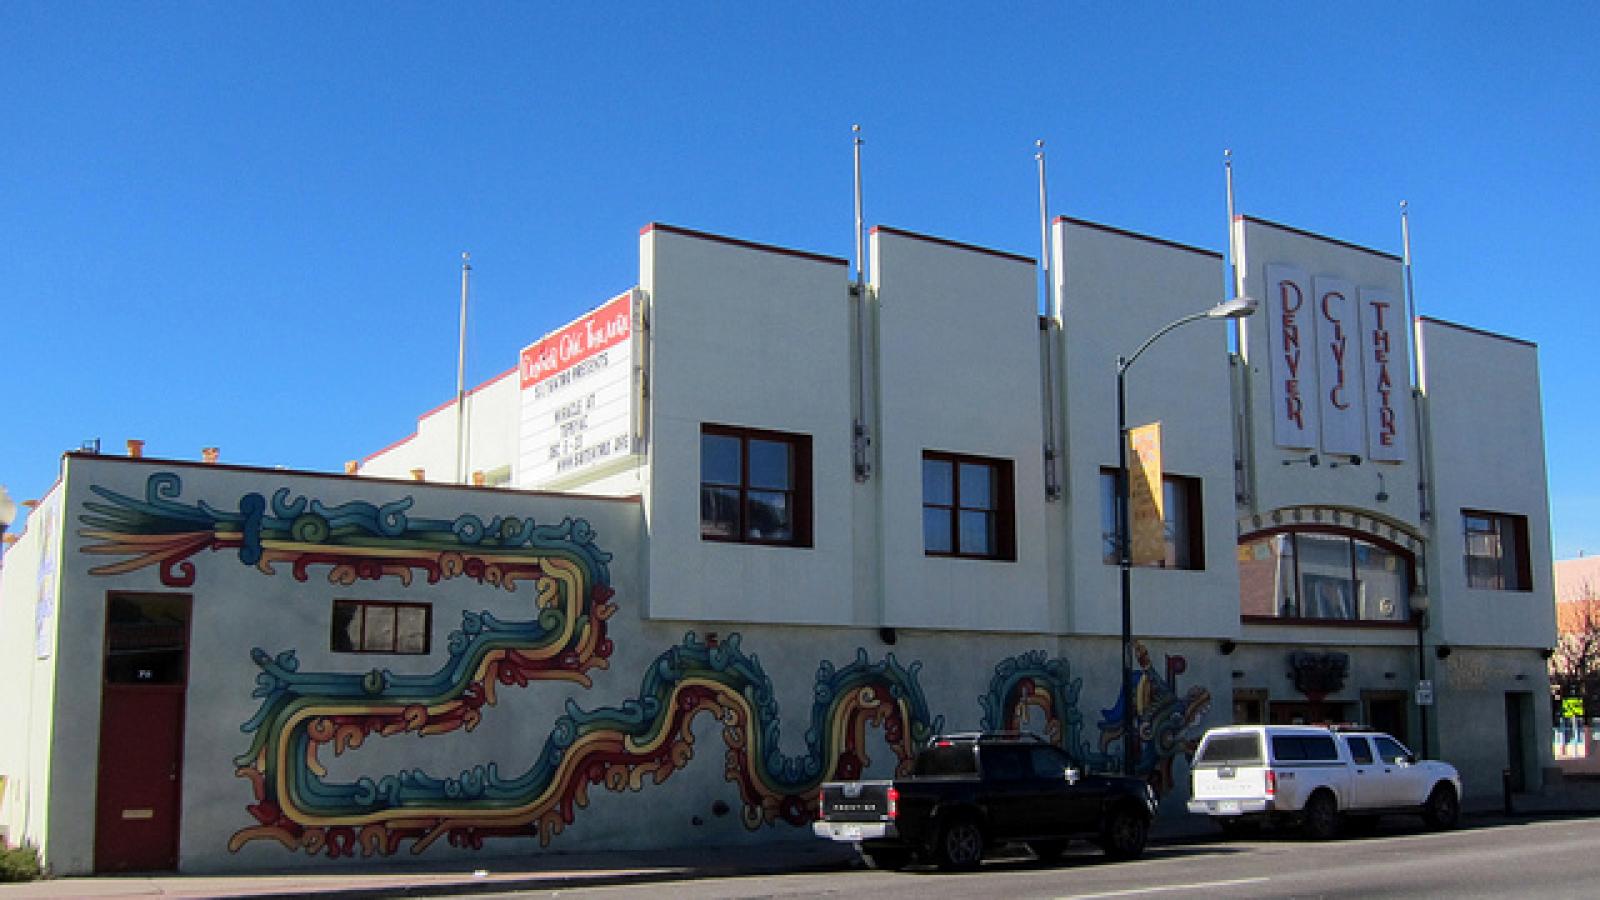 Exterior of the Denver Civic Theatre, with mural